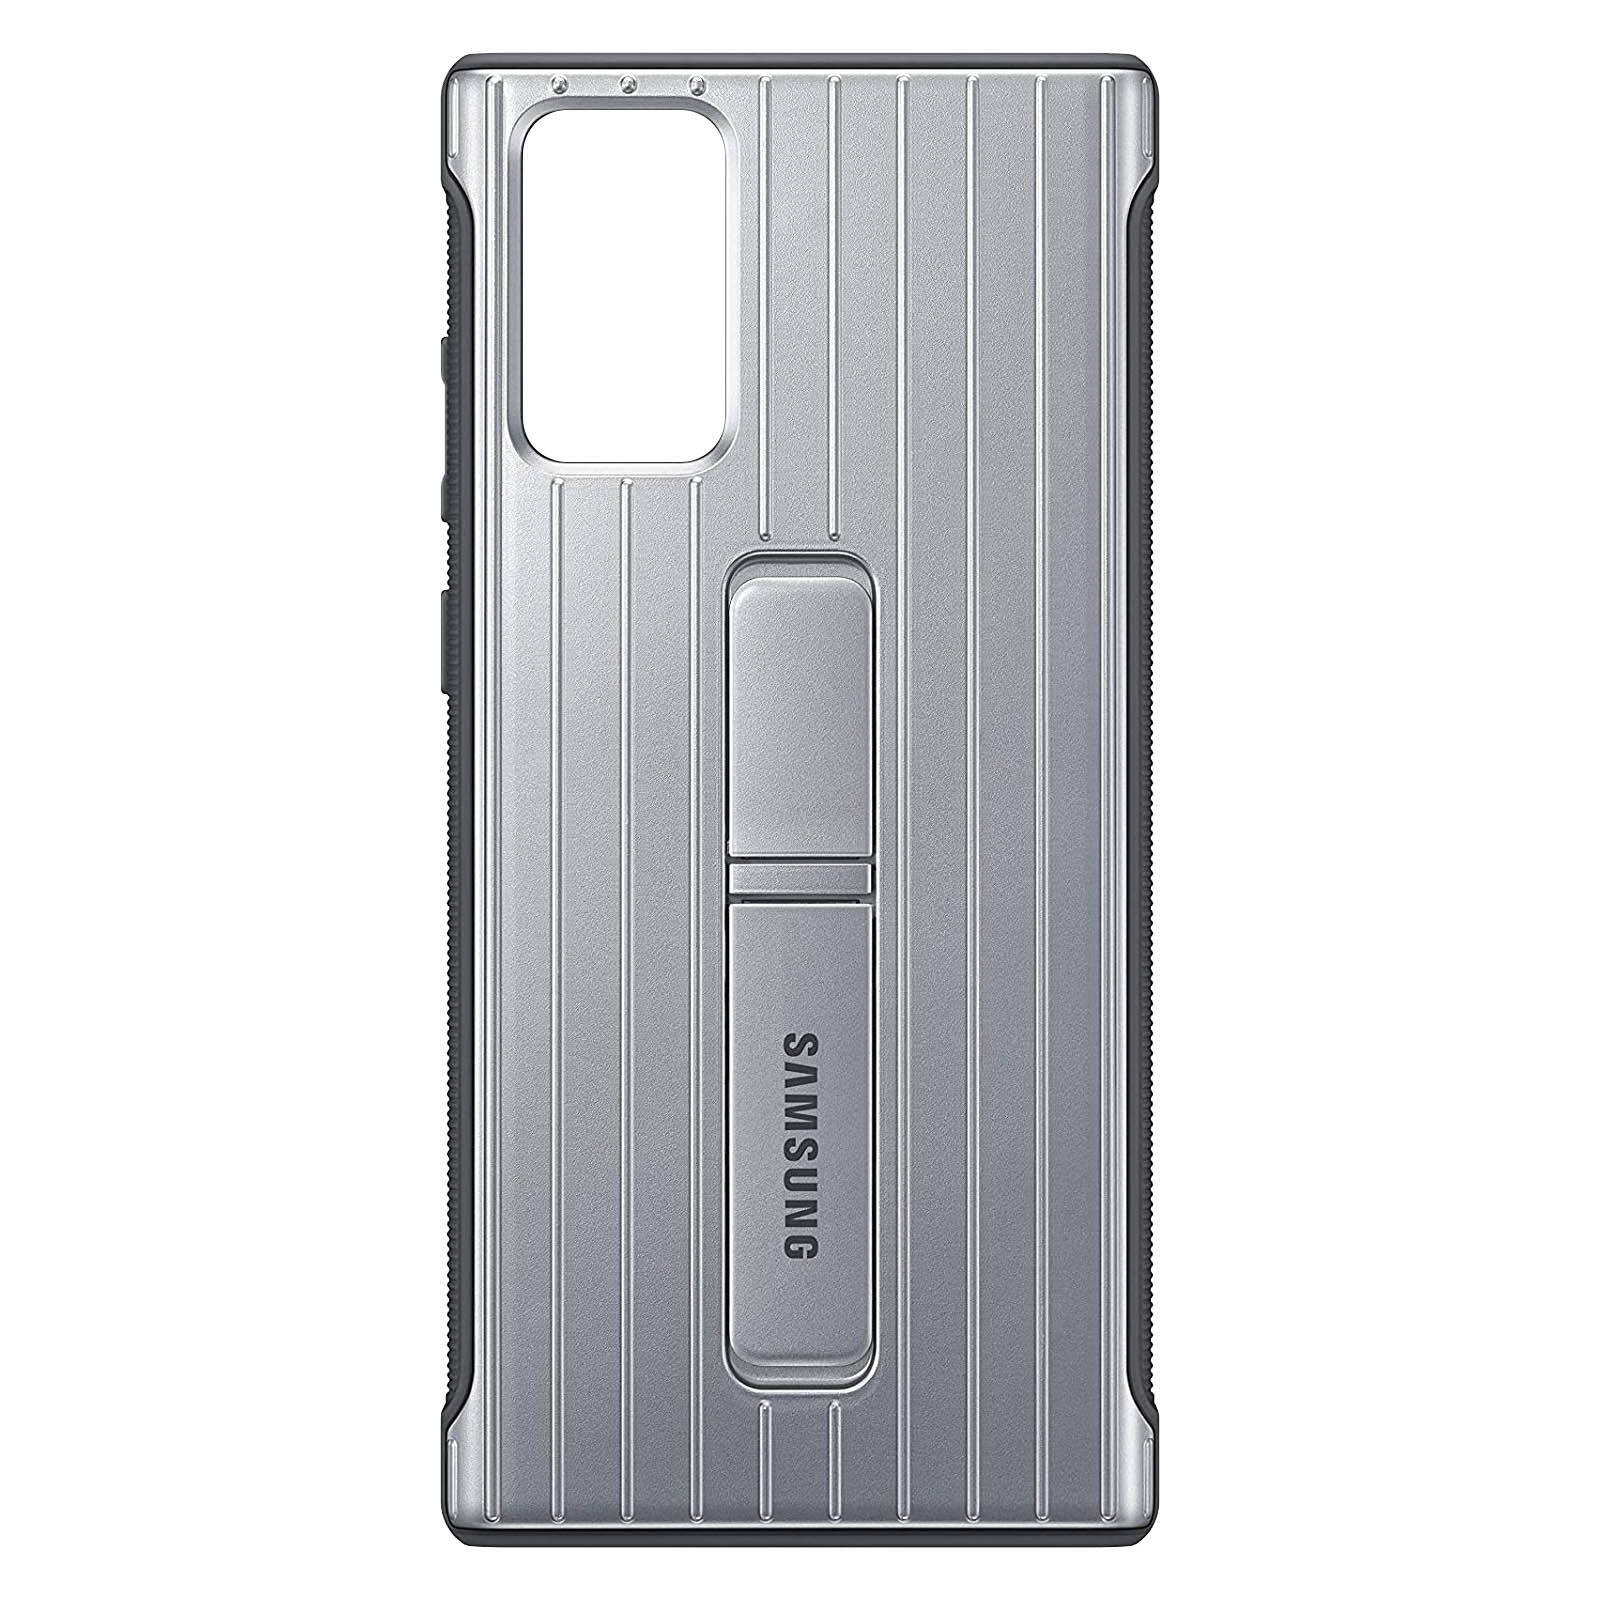 Silber Backcover, Series, SAMSUNG 20, Standing Samsung, Galaxy Note